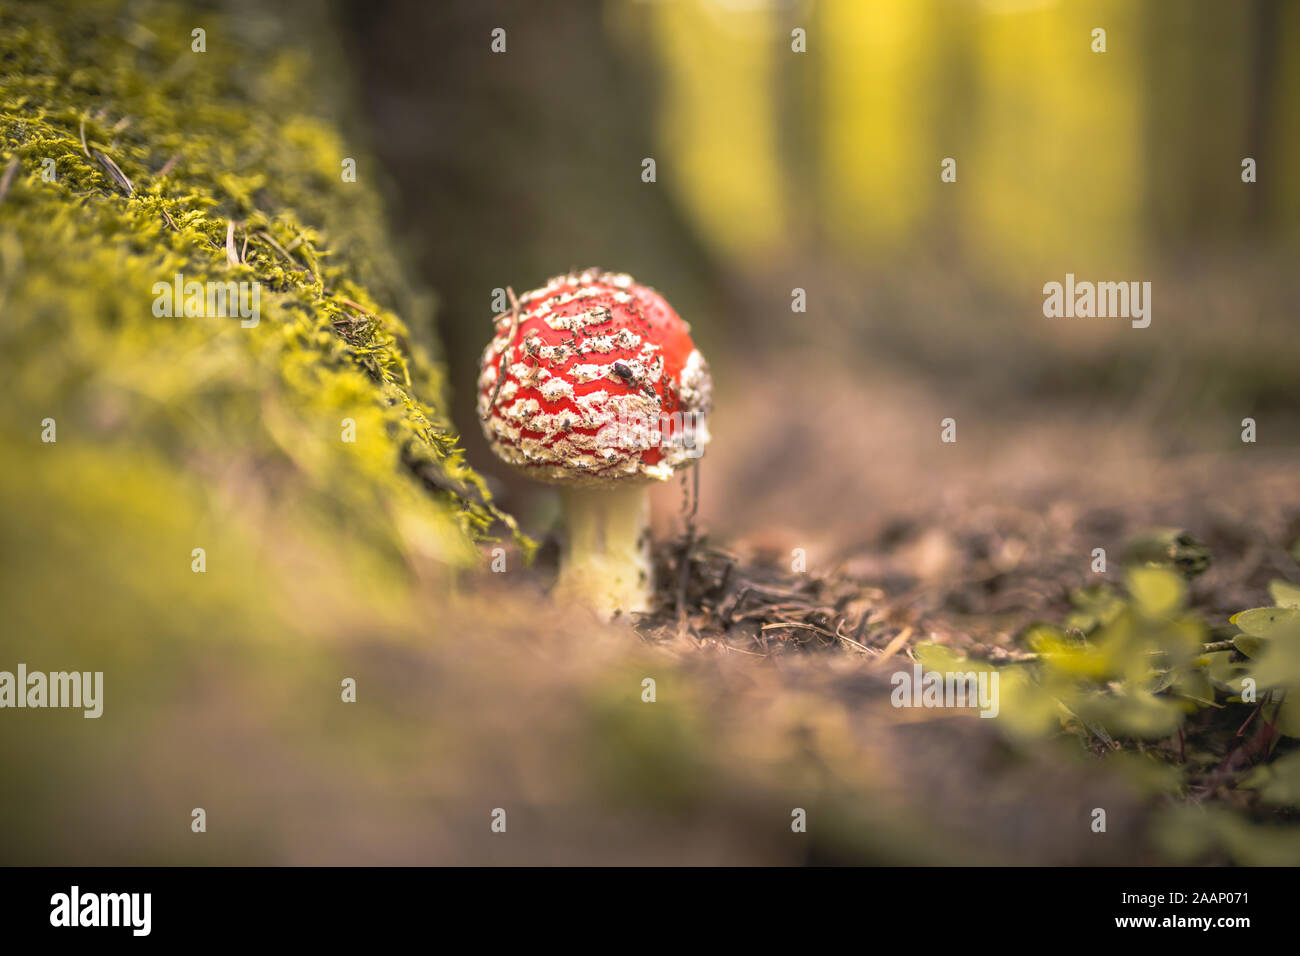 Amanita muscaria, commonly known as the fly agaric or fly amanita, is a basidiomycete of the genus Amanita. Although as poisonous, reports of human Stock Photo